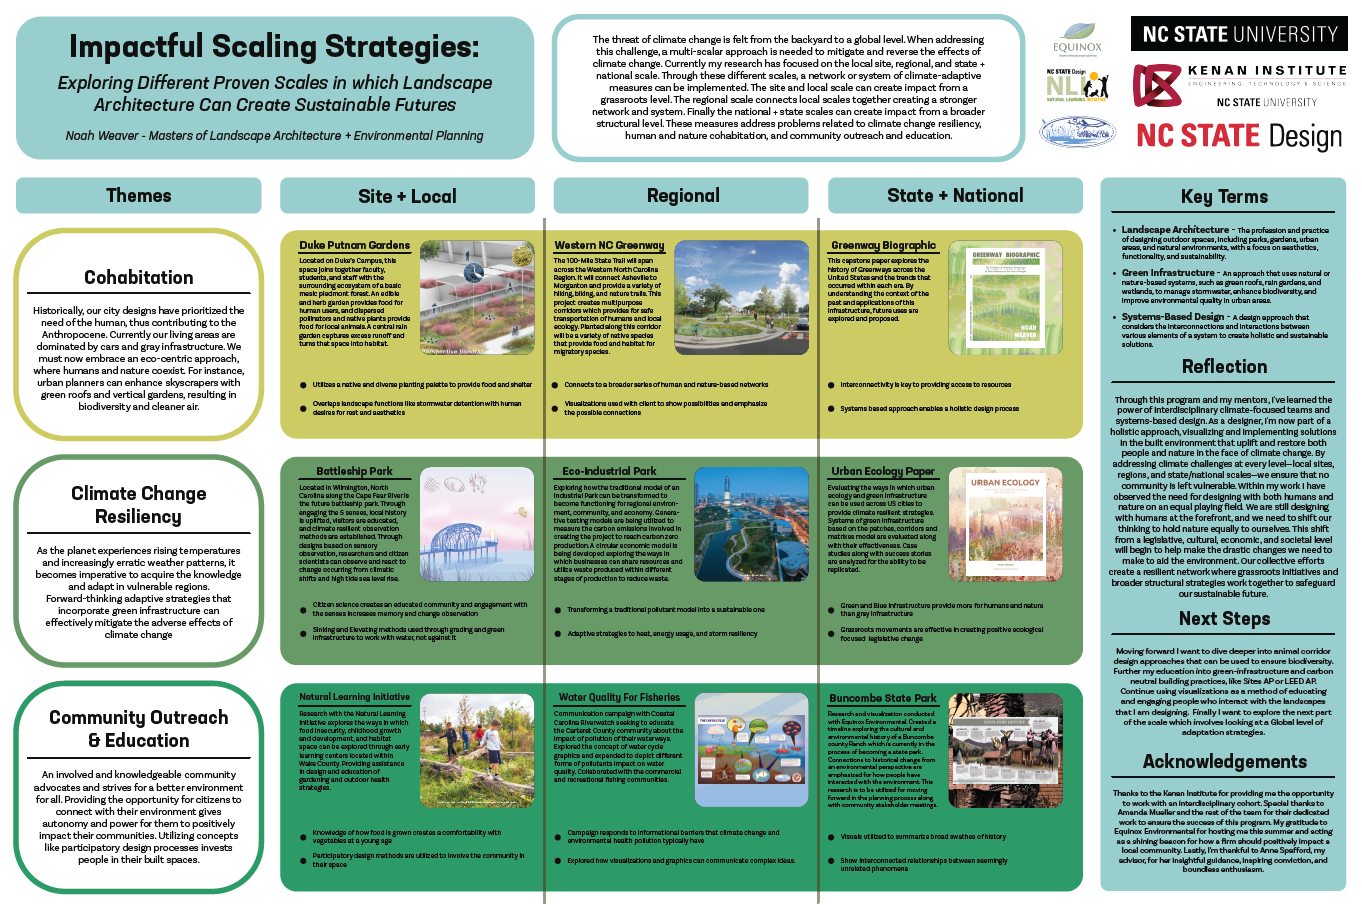 image of Noah Weaver's Poster - "Impactful Scaling Strategies: Exploring Different Proven Scales in which Landscape Architecture Can Create Sustainable Futures"